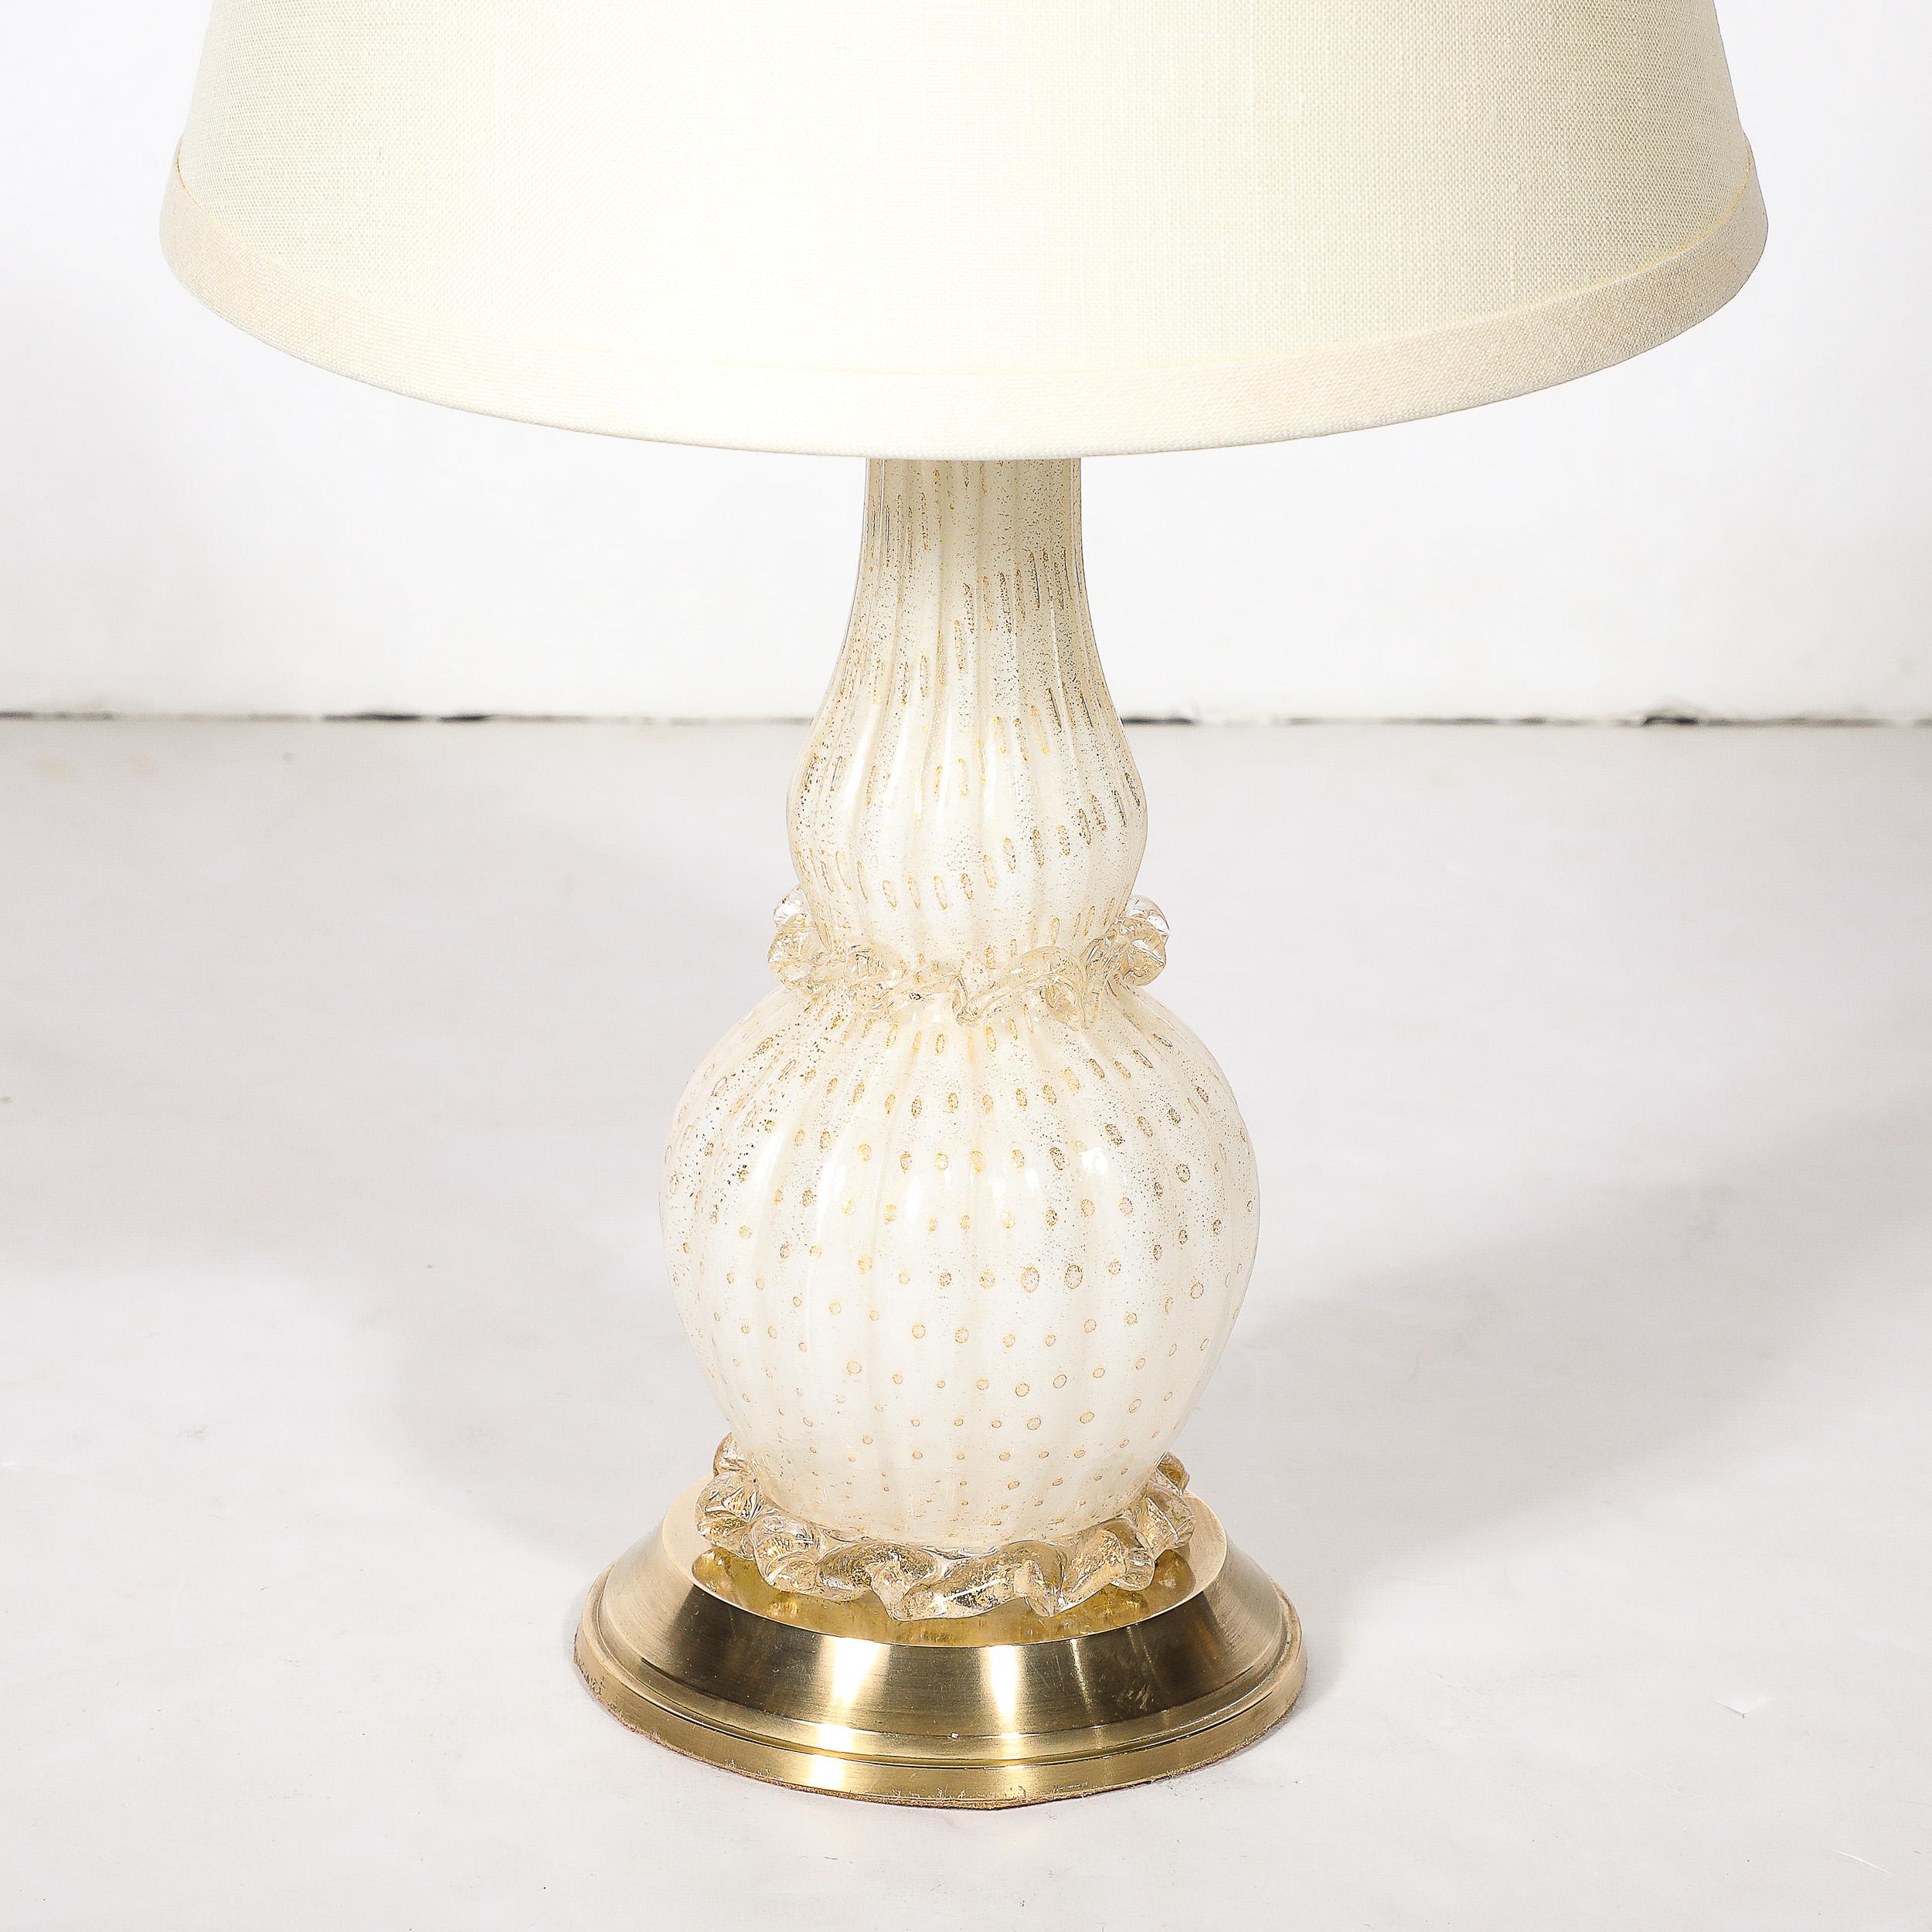 Italian Pair of Mid-Century Modernist Hand-Blown White Murano Glass & Brass Table Lamps For Sale